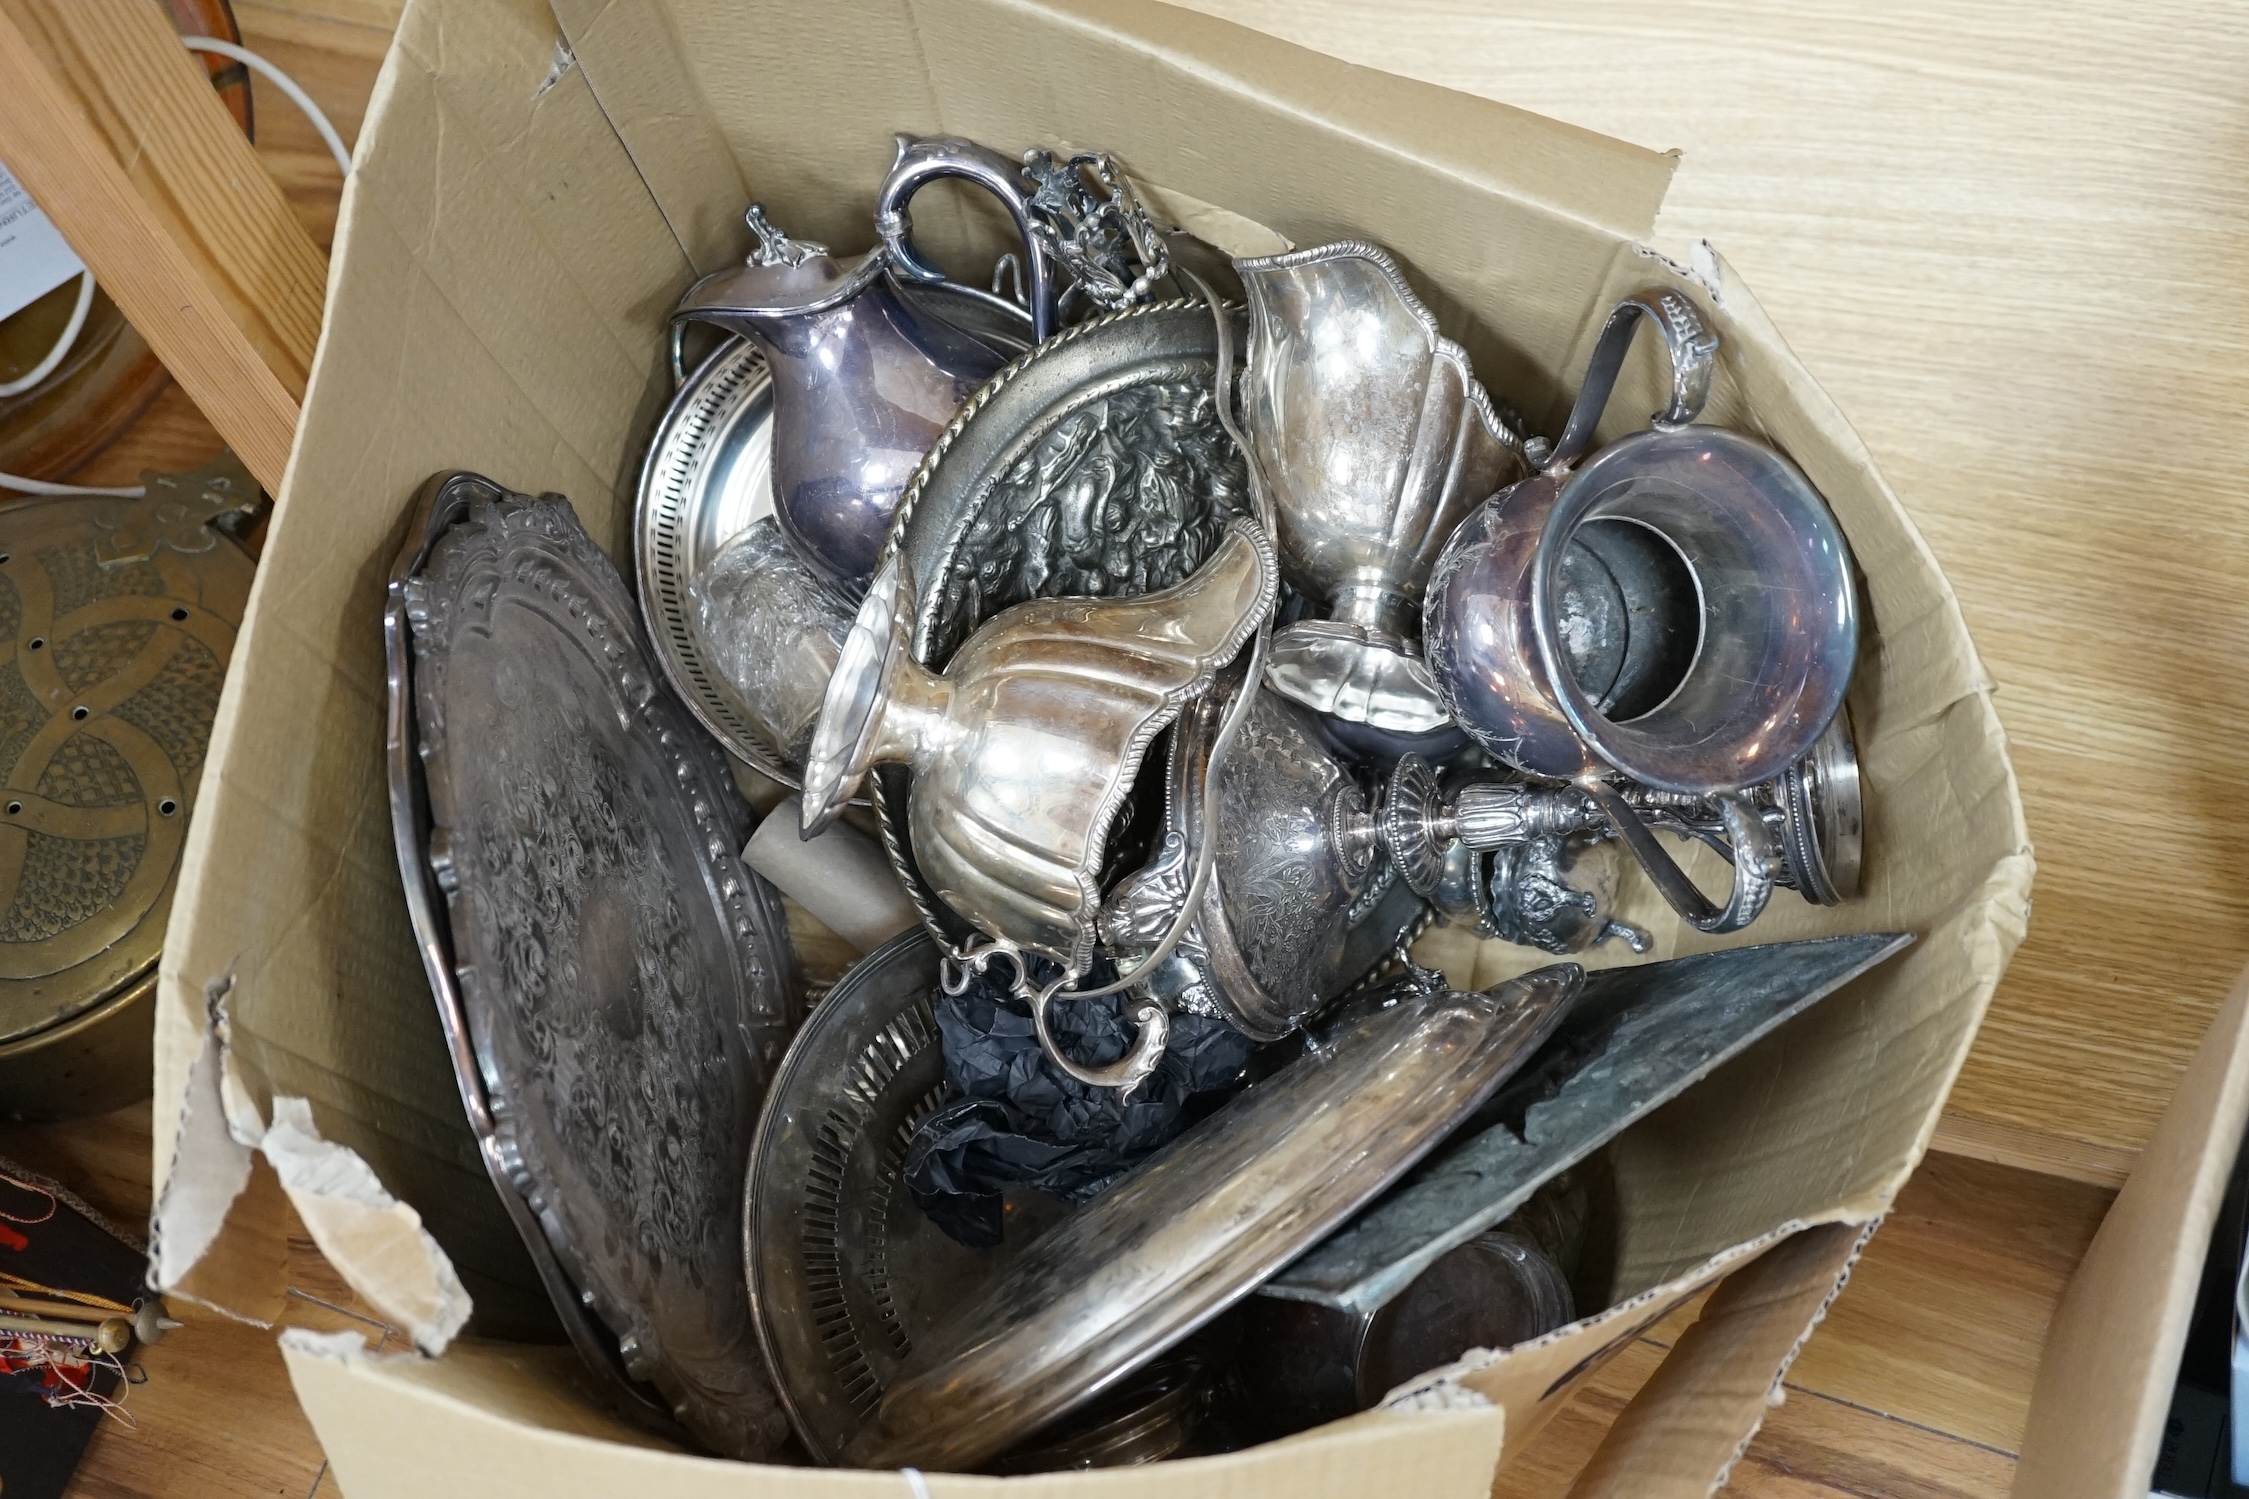 A quantity of silver plate to include a twin handled trophy, salvers and an embossed plaque depicting deer. Condition - varies, poor to fair